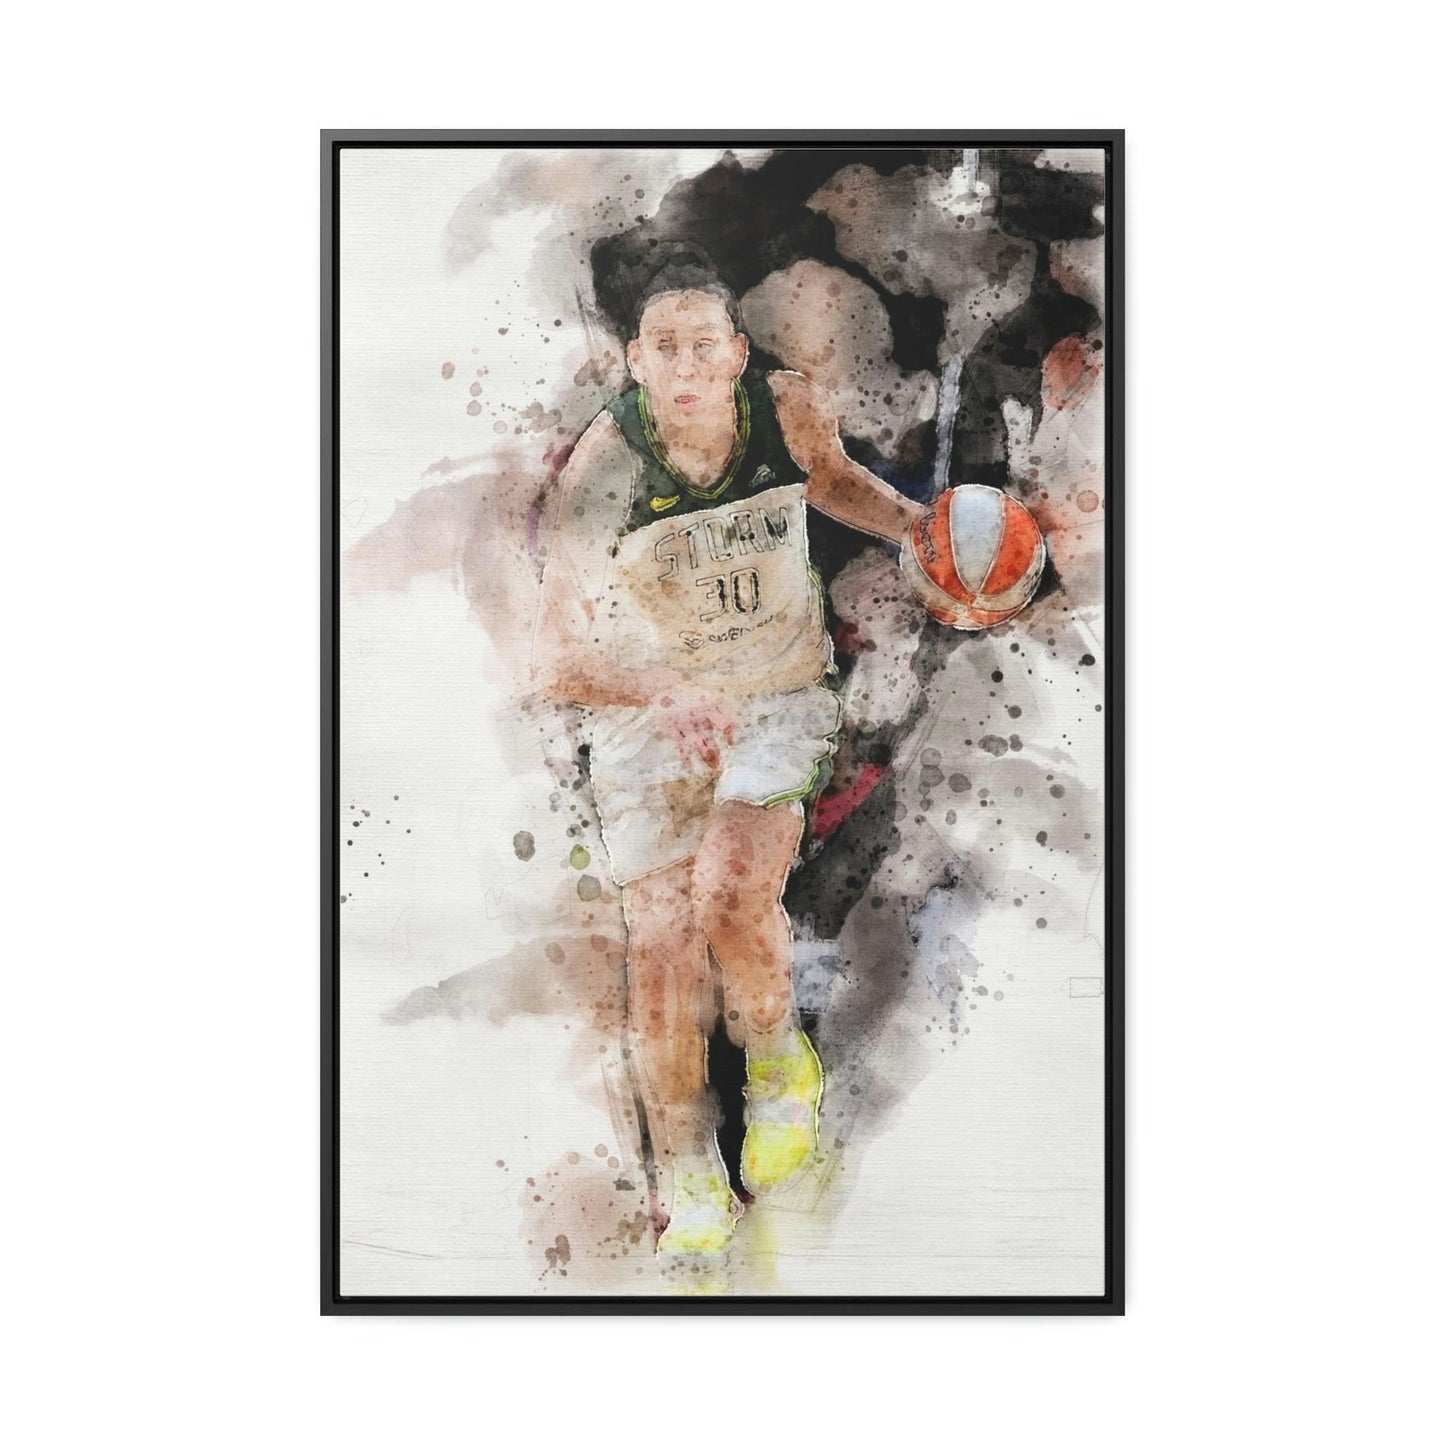 Breanna Stewart Poster, Canvas Wrap, Kids Room, Man Cave, Woman Cave, Game Room